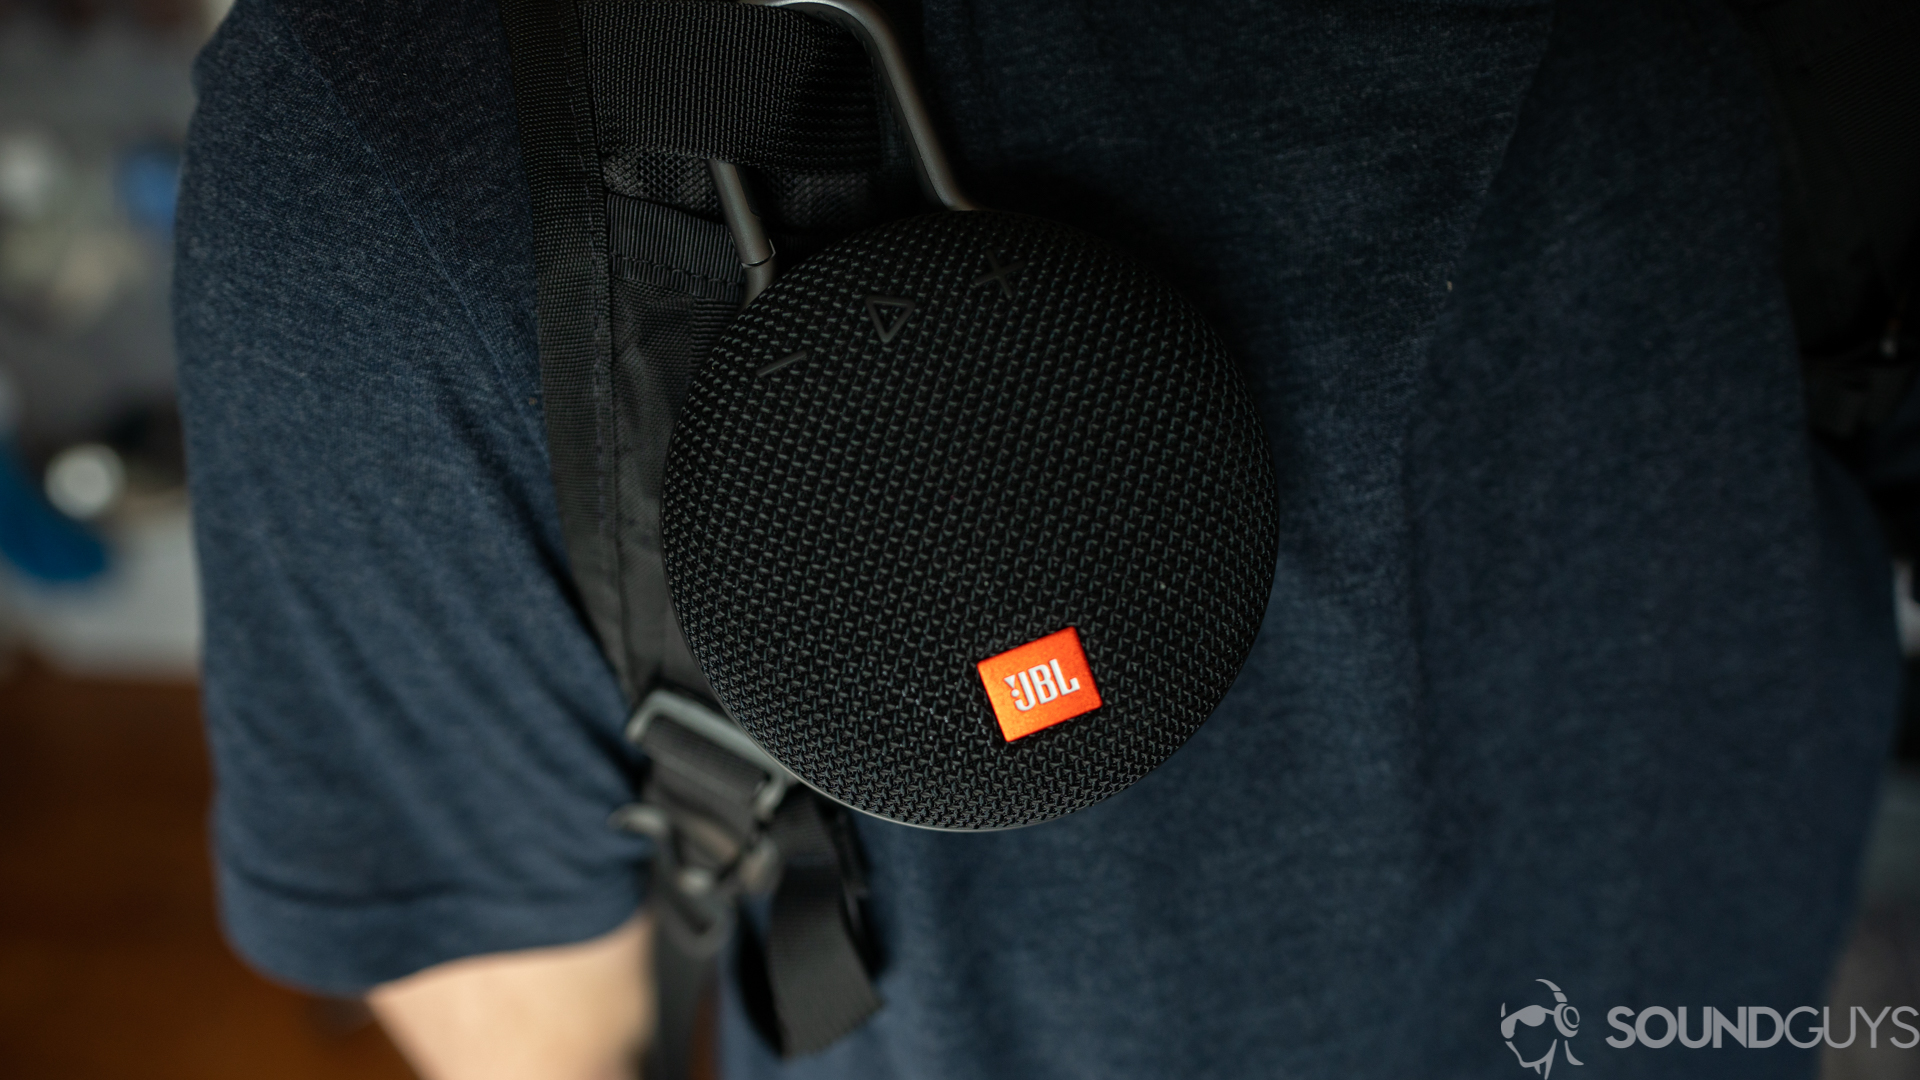 JBL Clip 3 review: A great speaker but the Clip 4 is better- SoundGuys